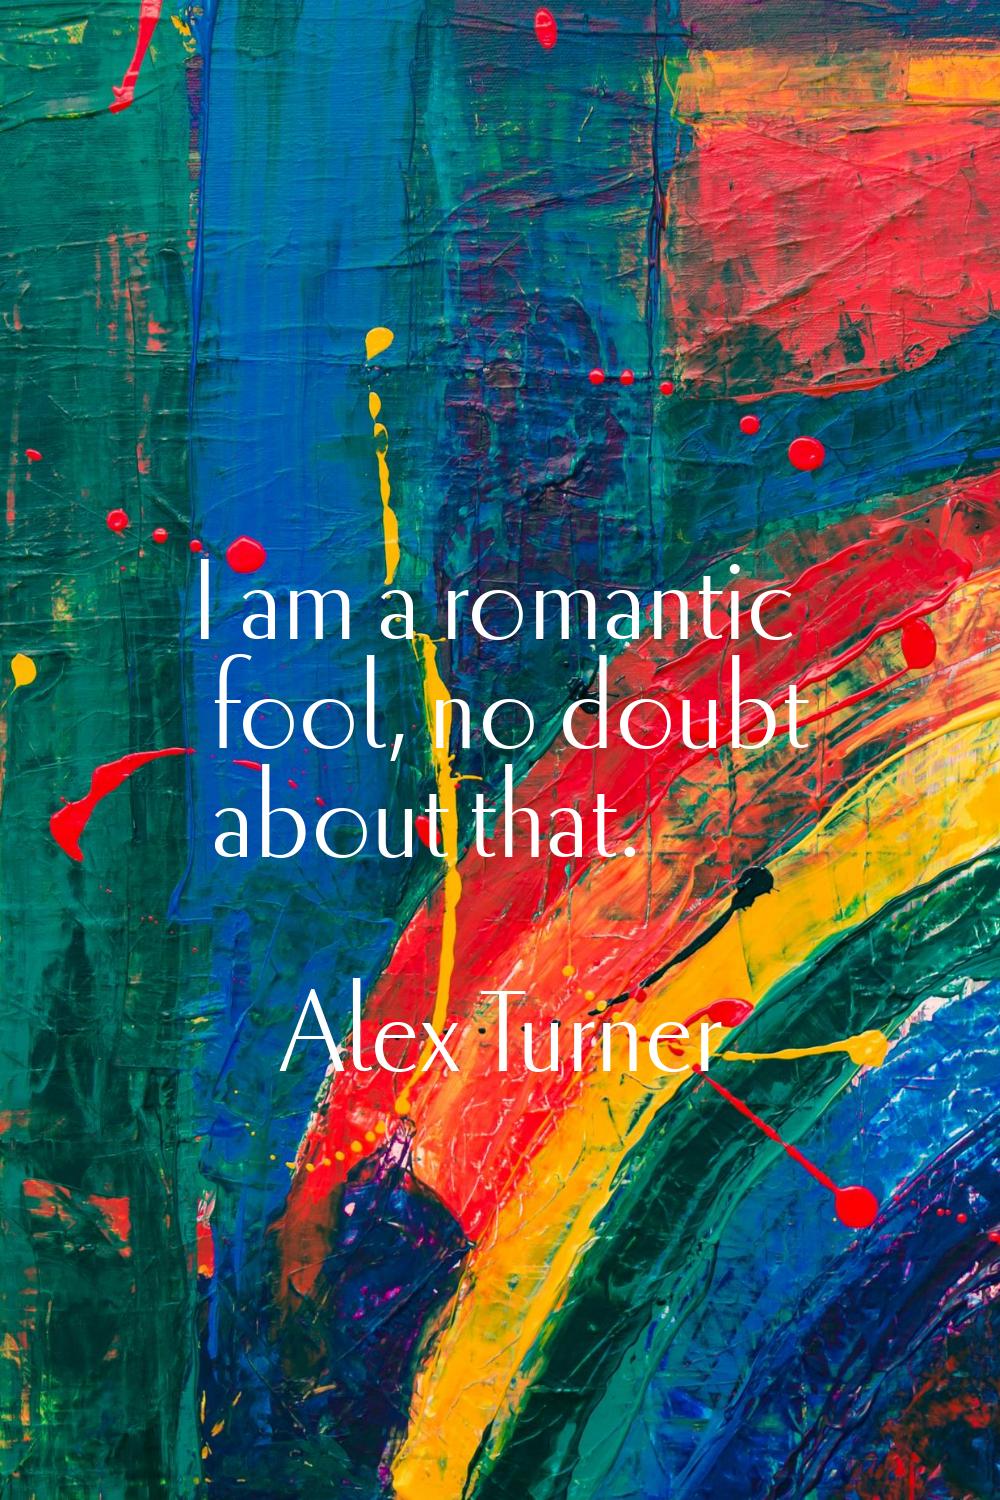 I am a romantic fool, no doubt about that.